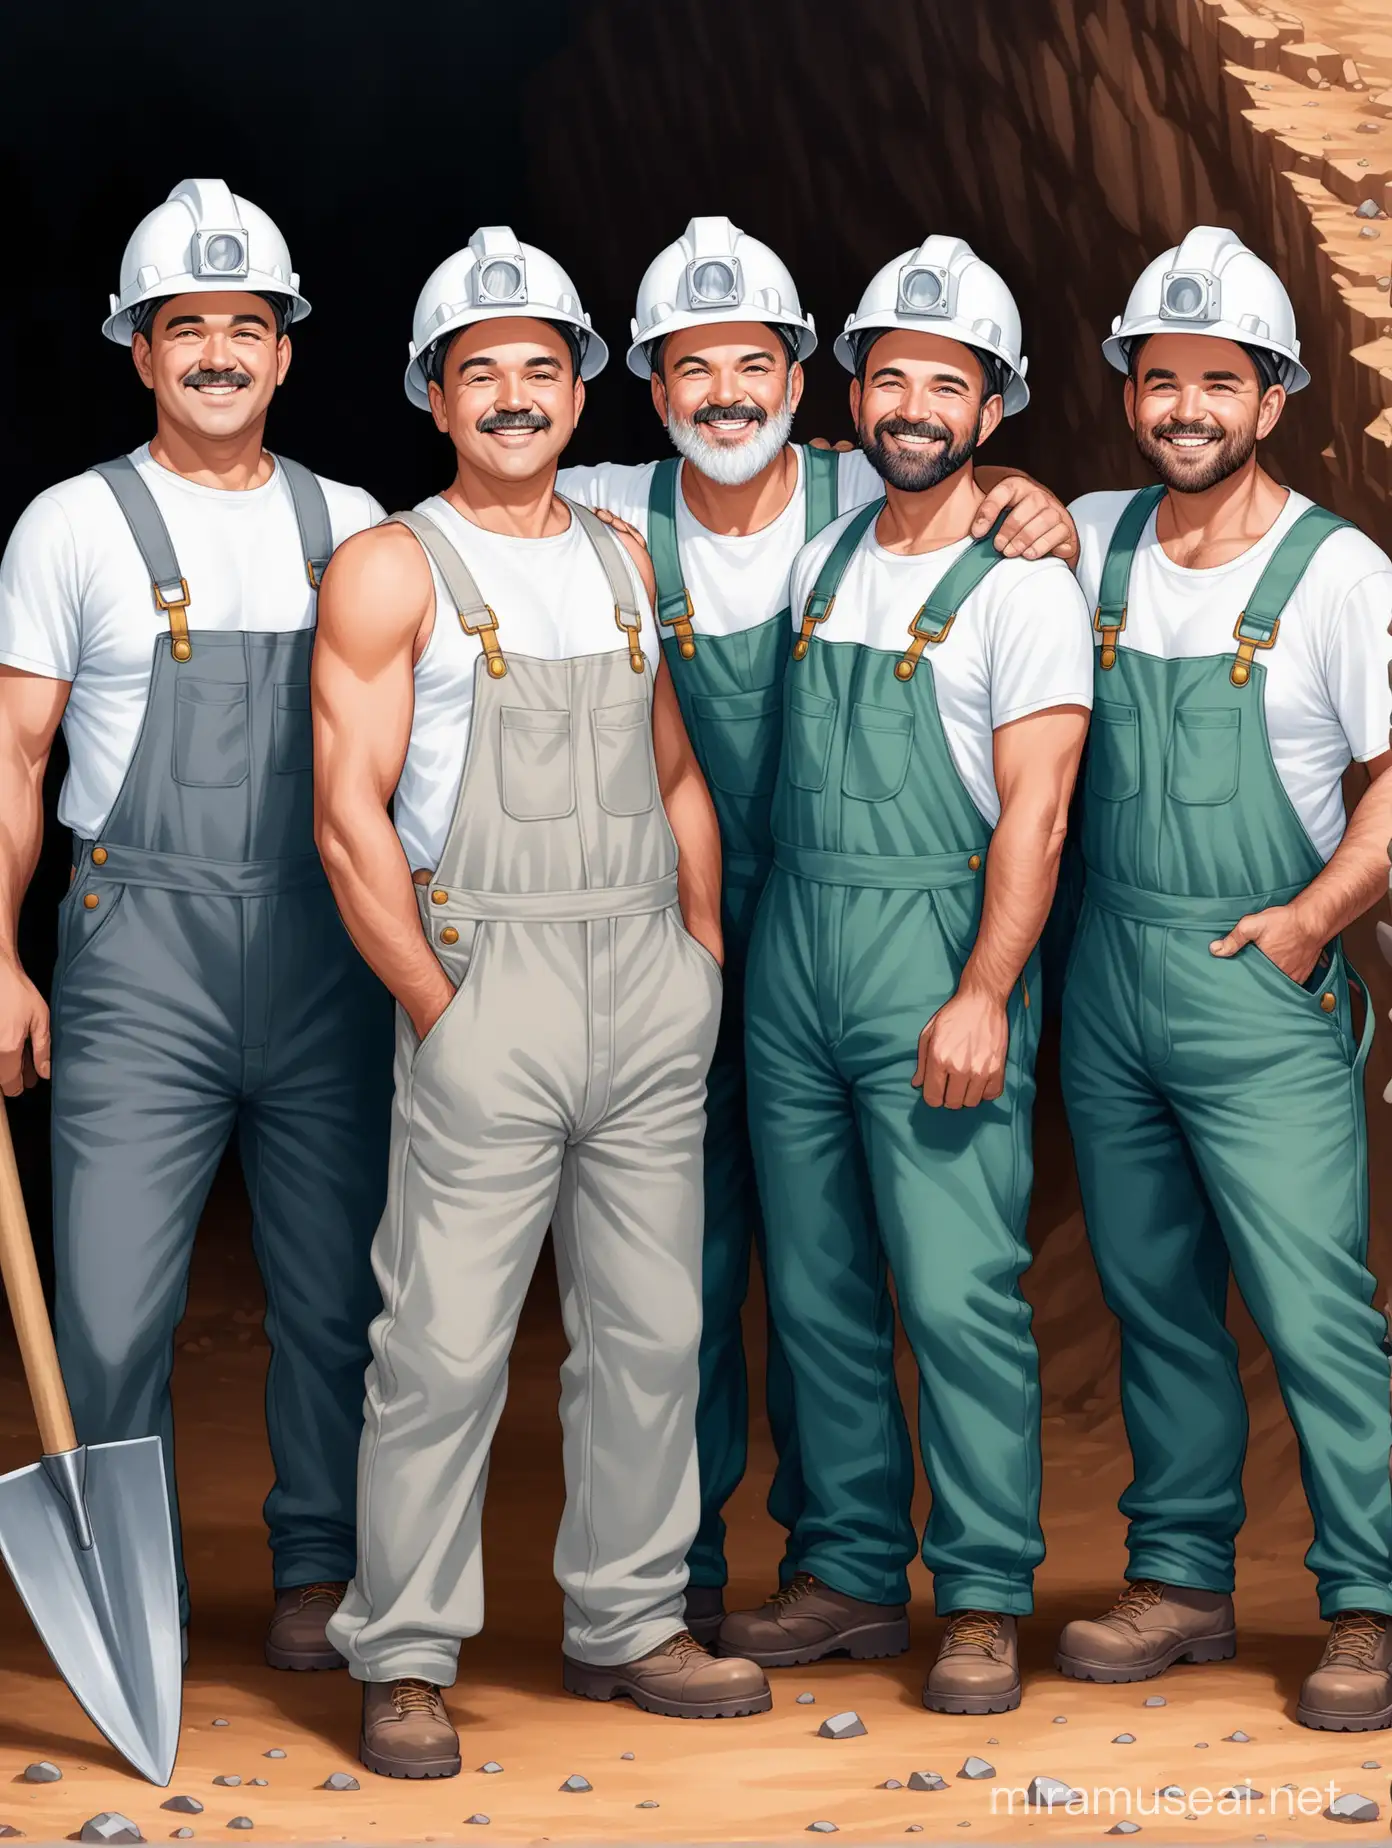 picture is of 5 men. All of them are smiling and posing together. 
You see a man wearing a white t-shirt and gray overalls as well as a mining helmet. 
There are 5 men in that photo. They are wearing different things, but all holding pickaxes. they are miners. They are posed together smiling holding pickaxes. Make it more cartoon
